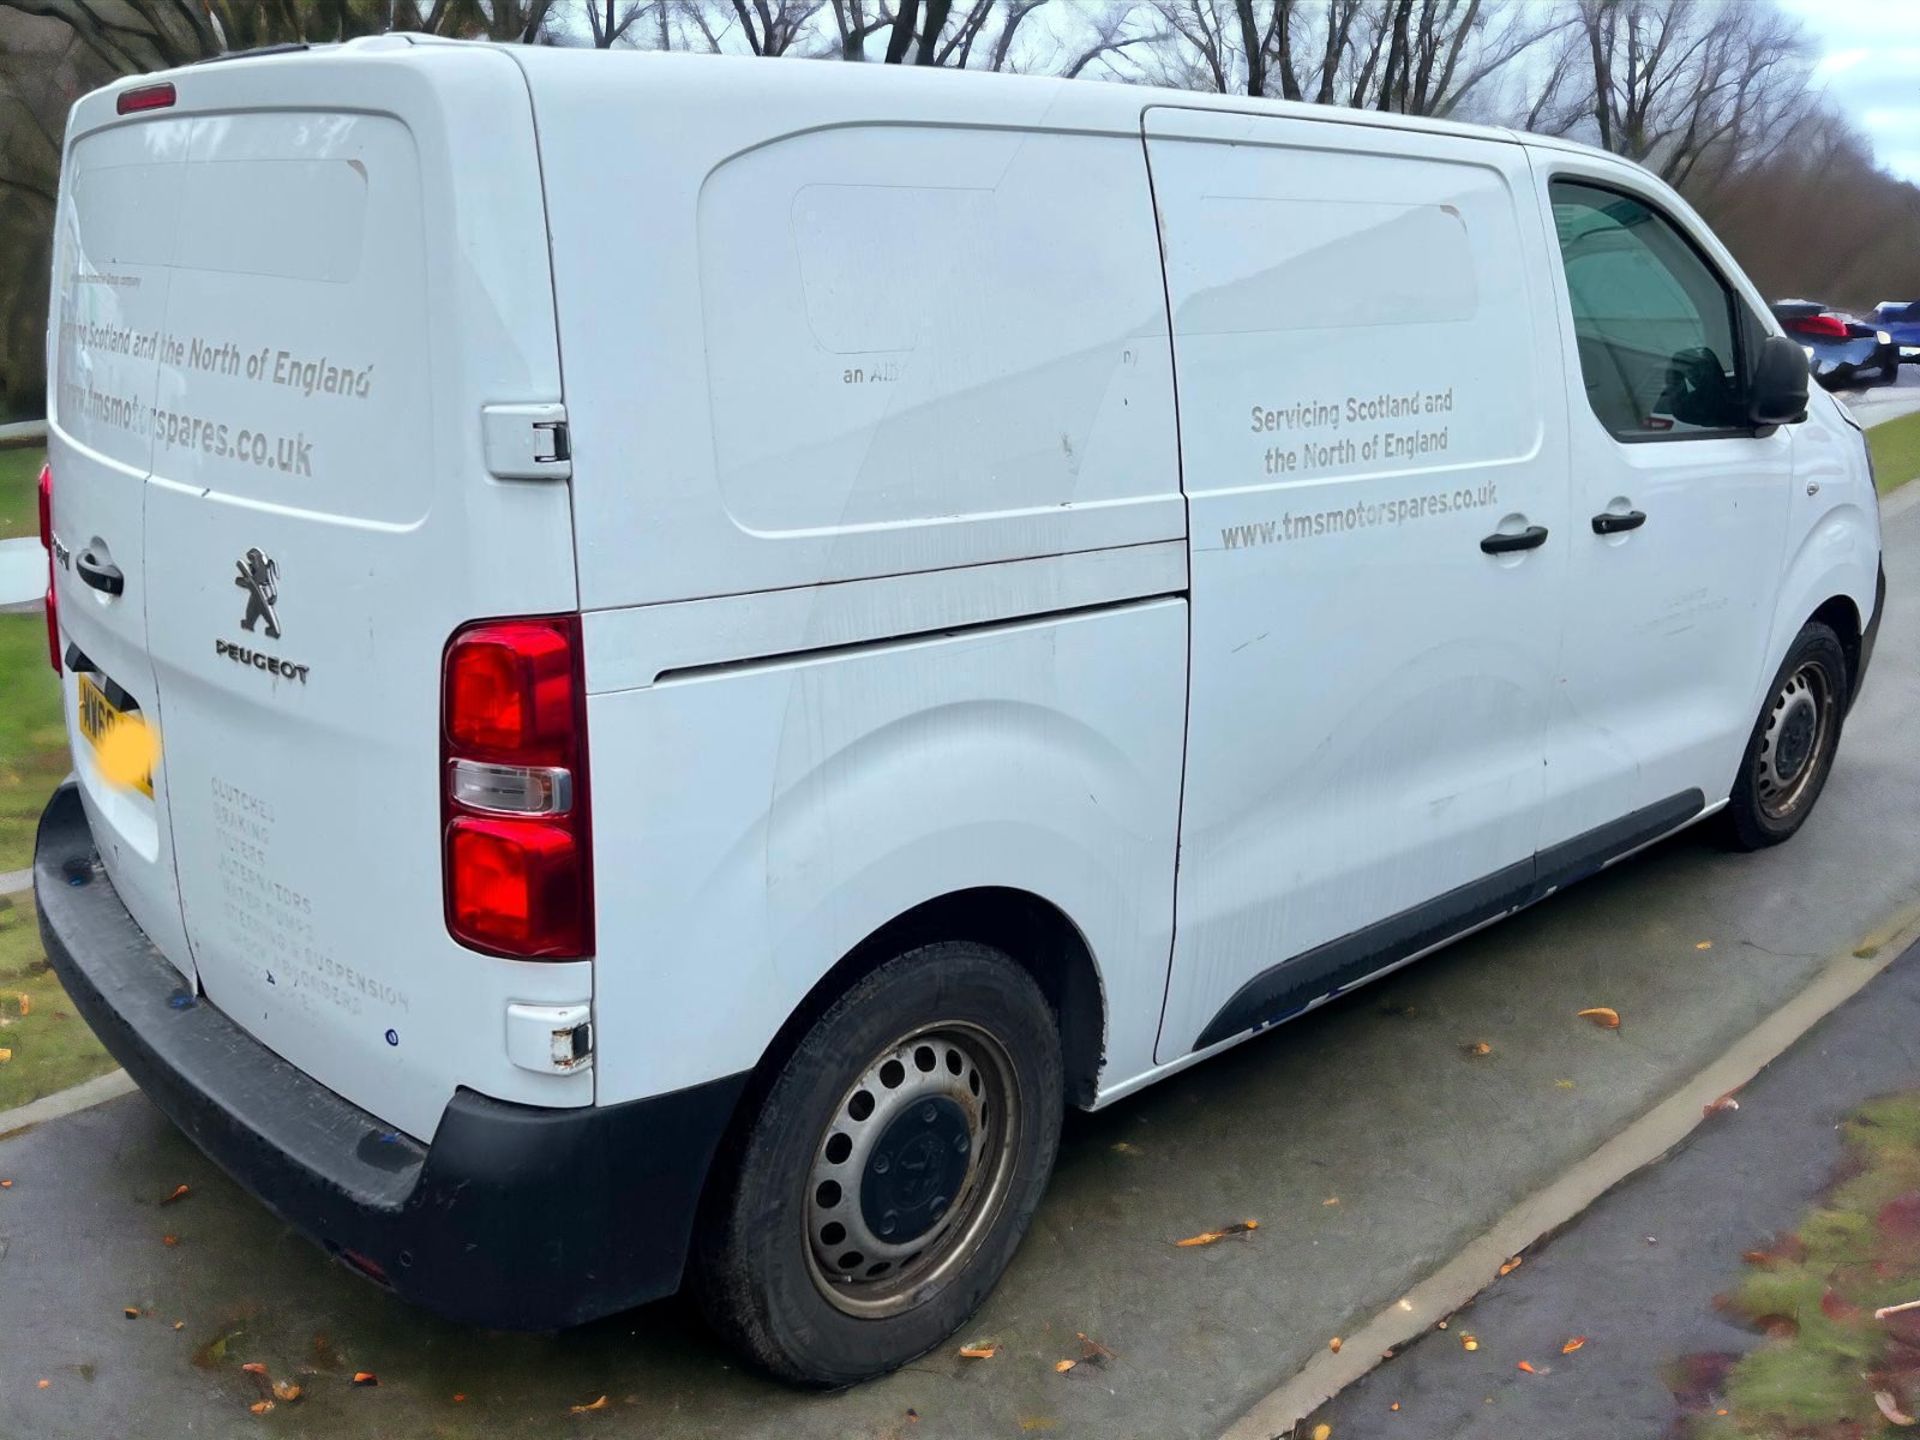 2019 PEUGEOT EXPERT PROFESSIONAL - SPACIOUS AND FEATURE-RICH FLEET VAN **SPARES OR REPAIRS** - Image 3 of 13